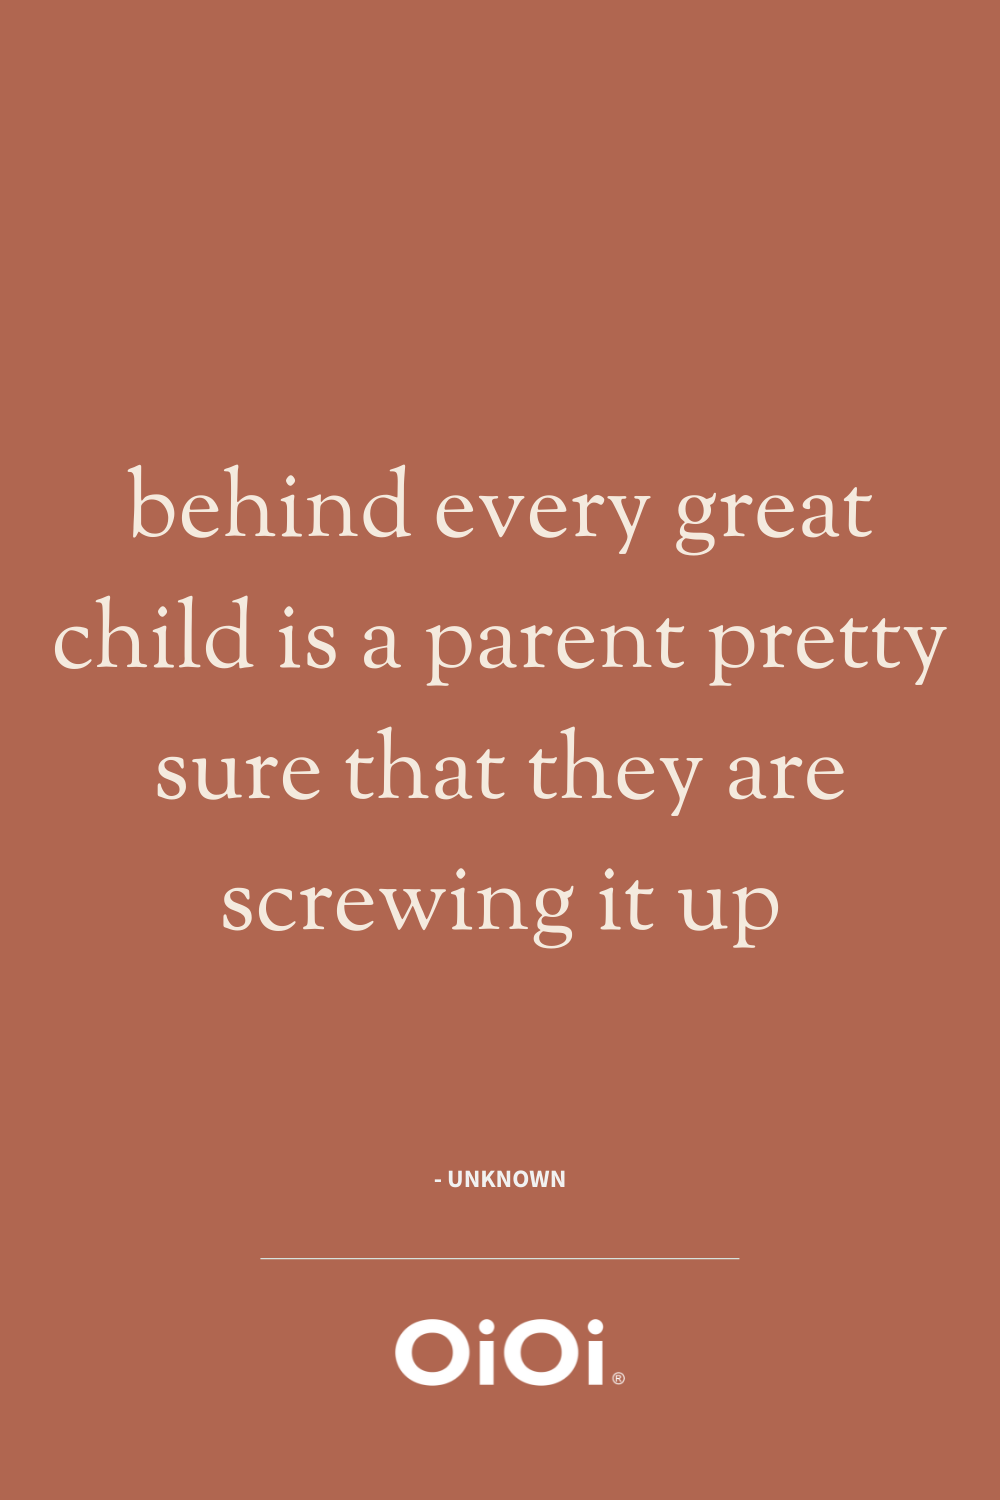 quote: behind every great child is a parent pretty sure that they are screwing it up